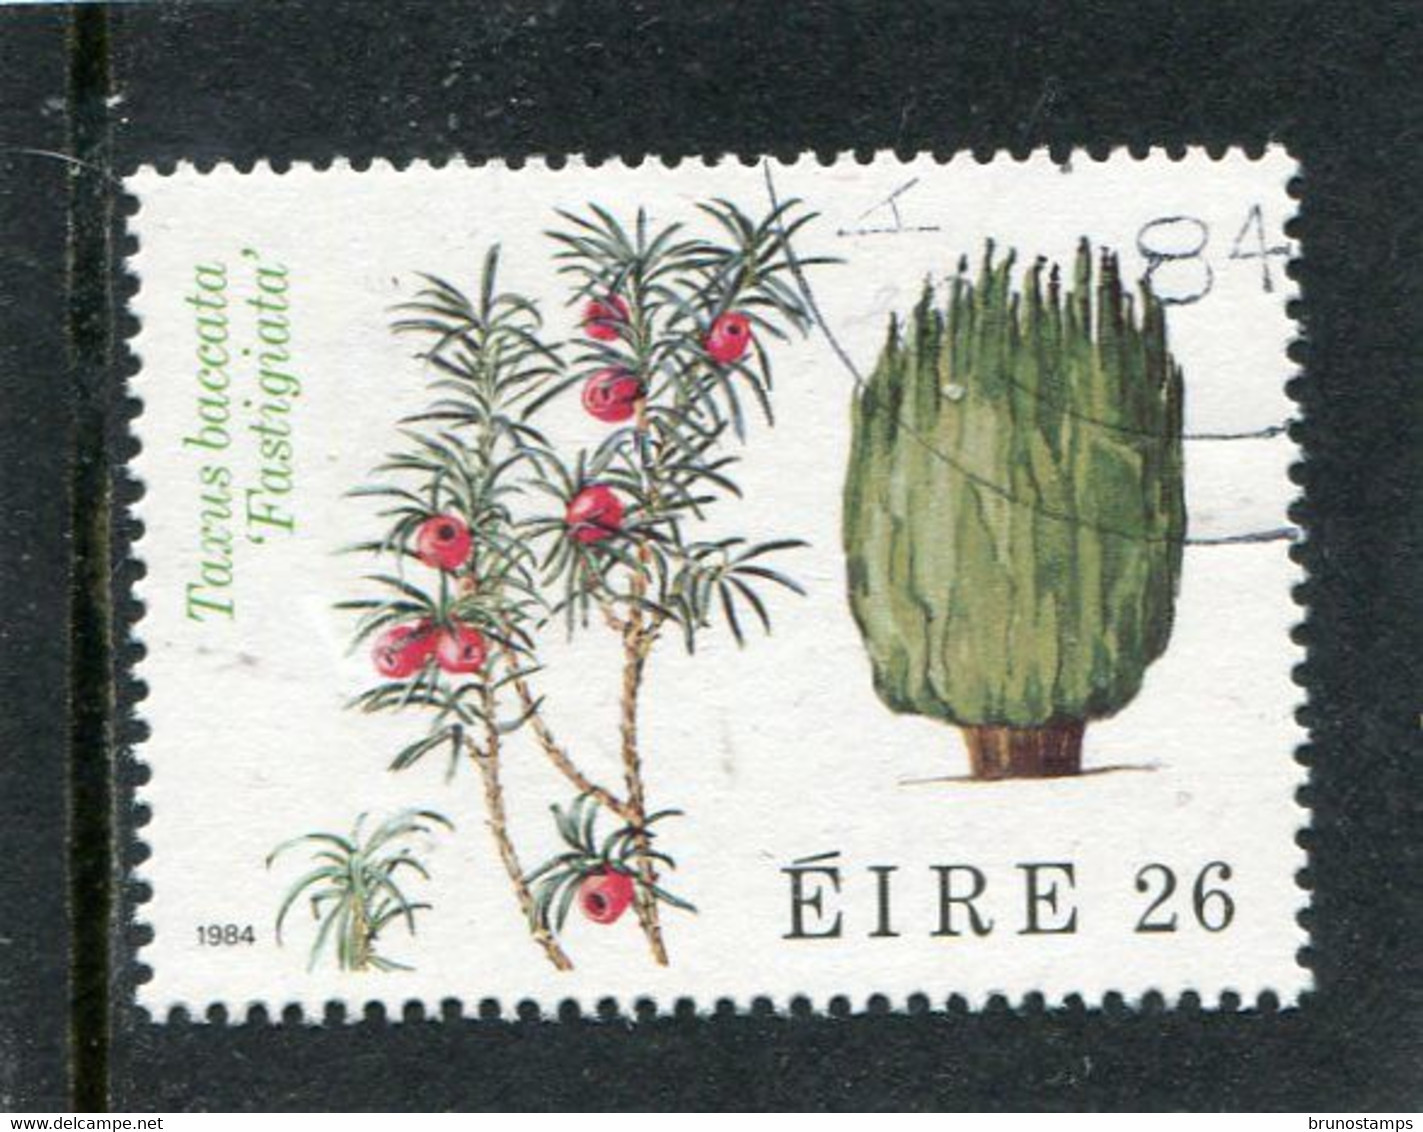 IRELAND/EIRE - 1984   26p  TREES  FINE USED - Used Stamps